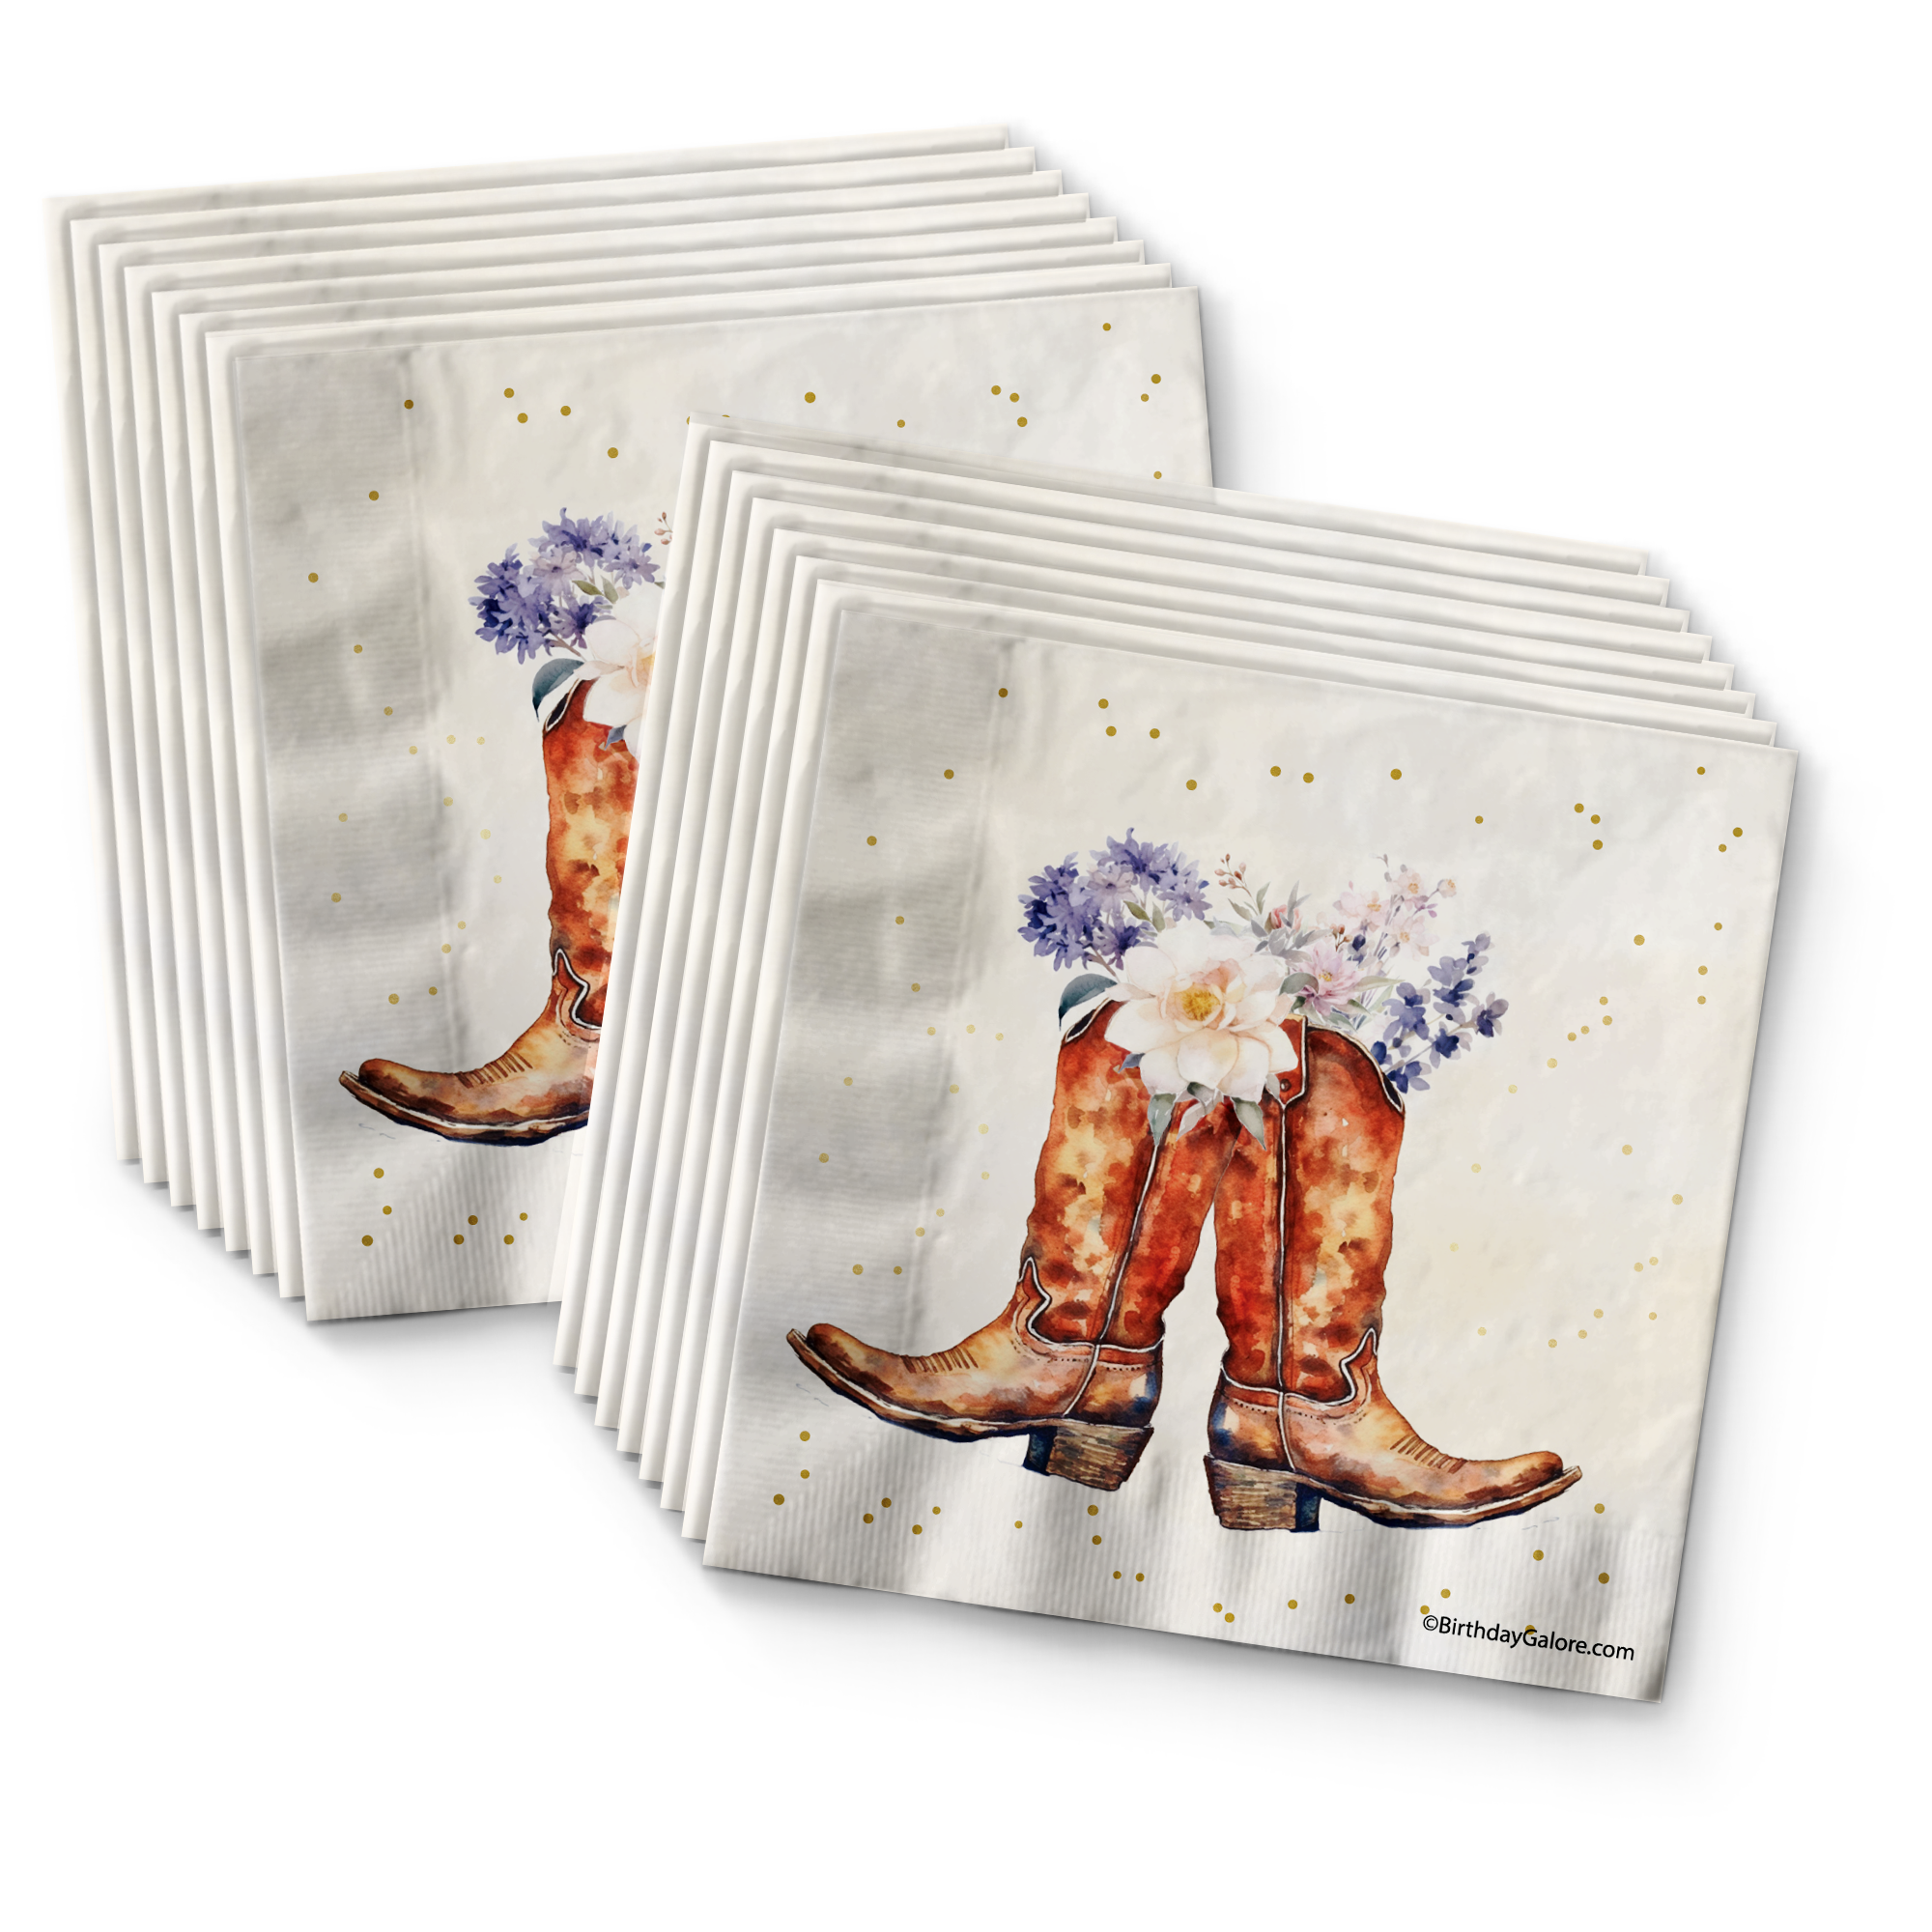 Cowgirl Boots Birthday Party Tableware Kit For 16 Guests